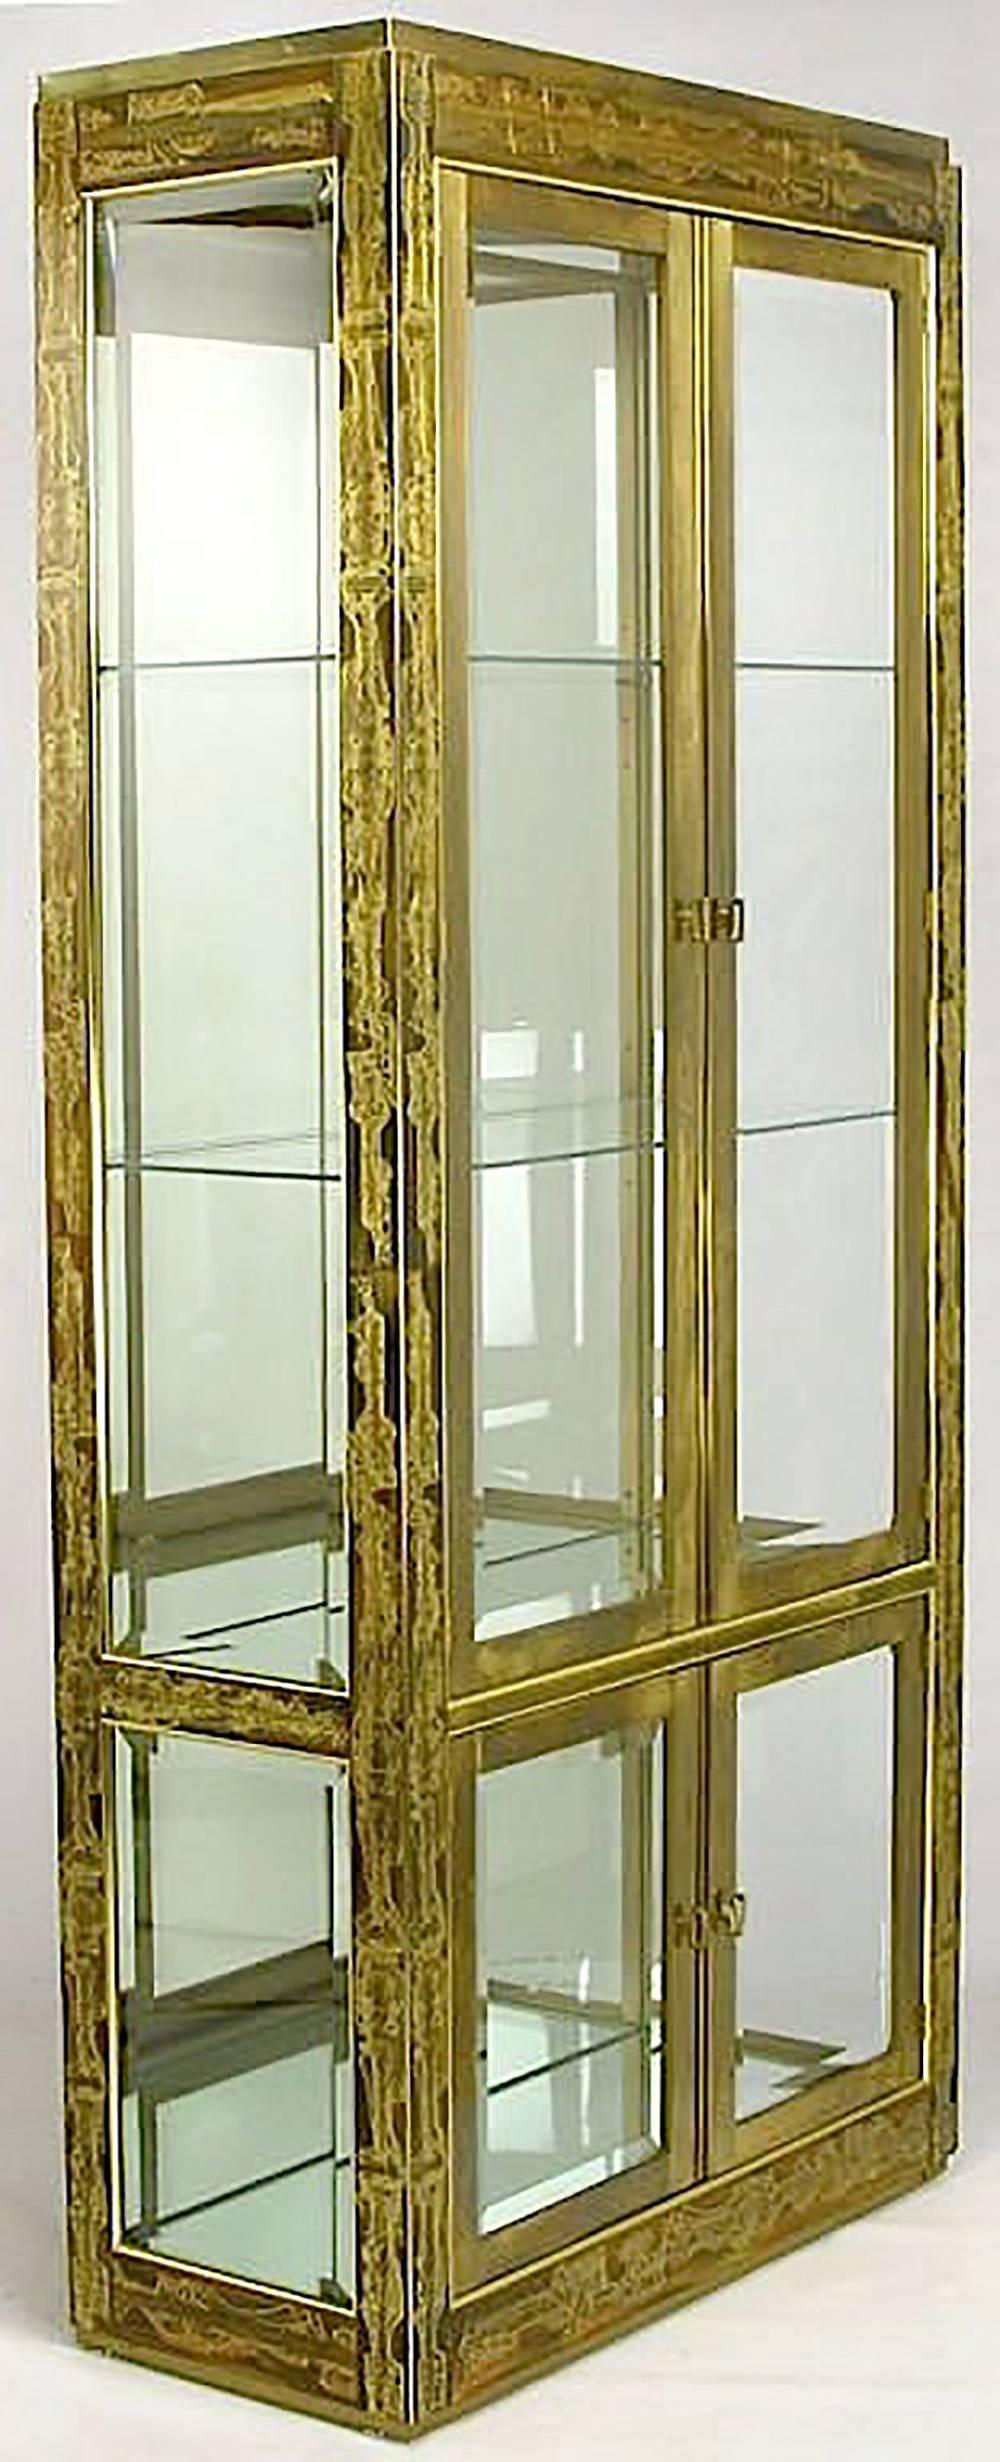 Pair of Mastercraft brass vitrines with the entire casing clad in acid etched panels by the Canadian artist, Bernhard Rohne... Each cabinet has four doors that are heavy brass wrapped glass panels with solid brass open rectangular pulls. The crown